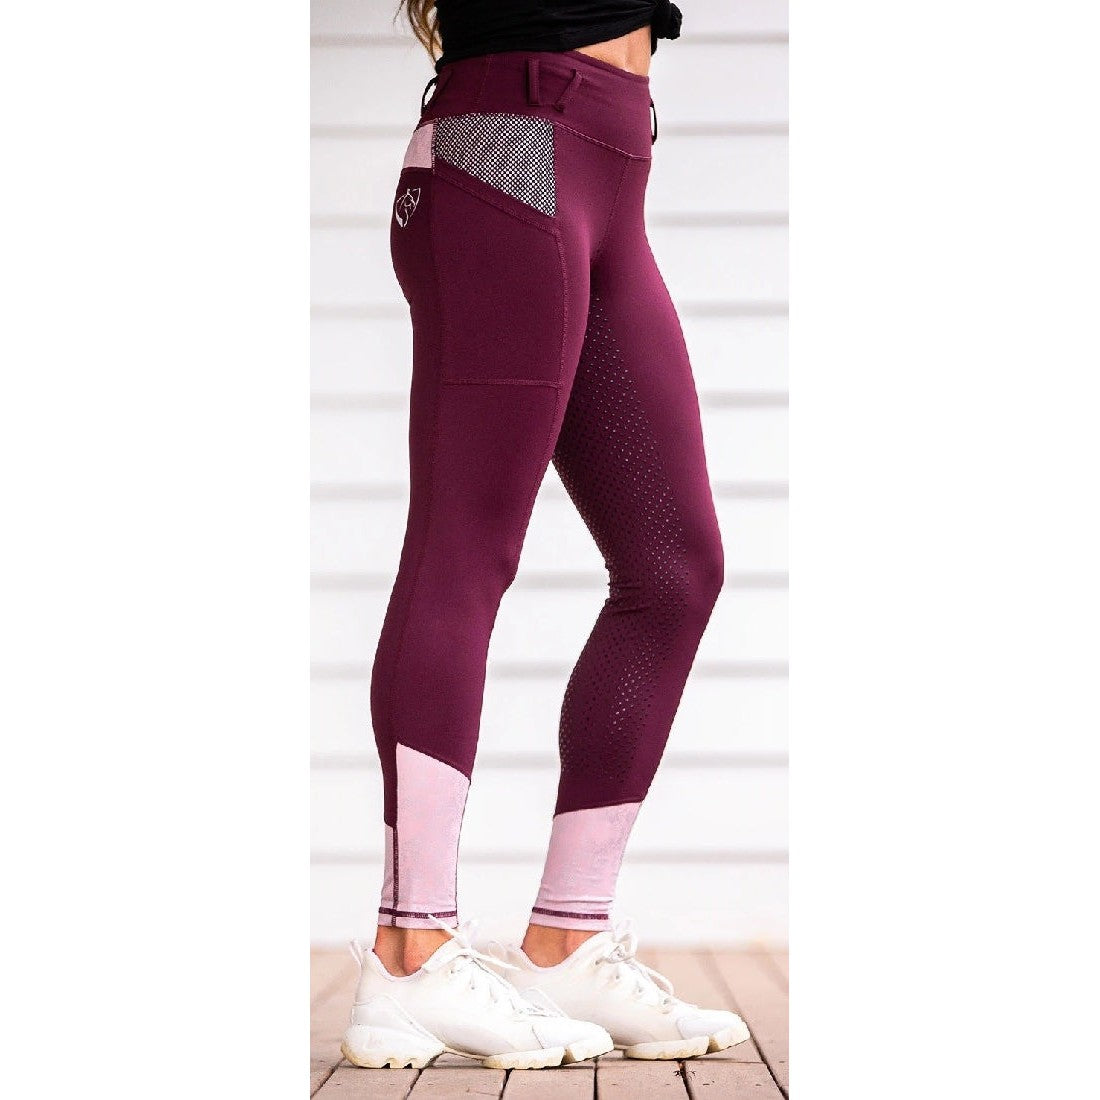 Woman wearing stylish burgundy horse riding tights with white sneakers.